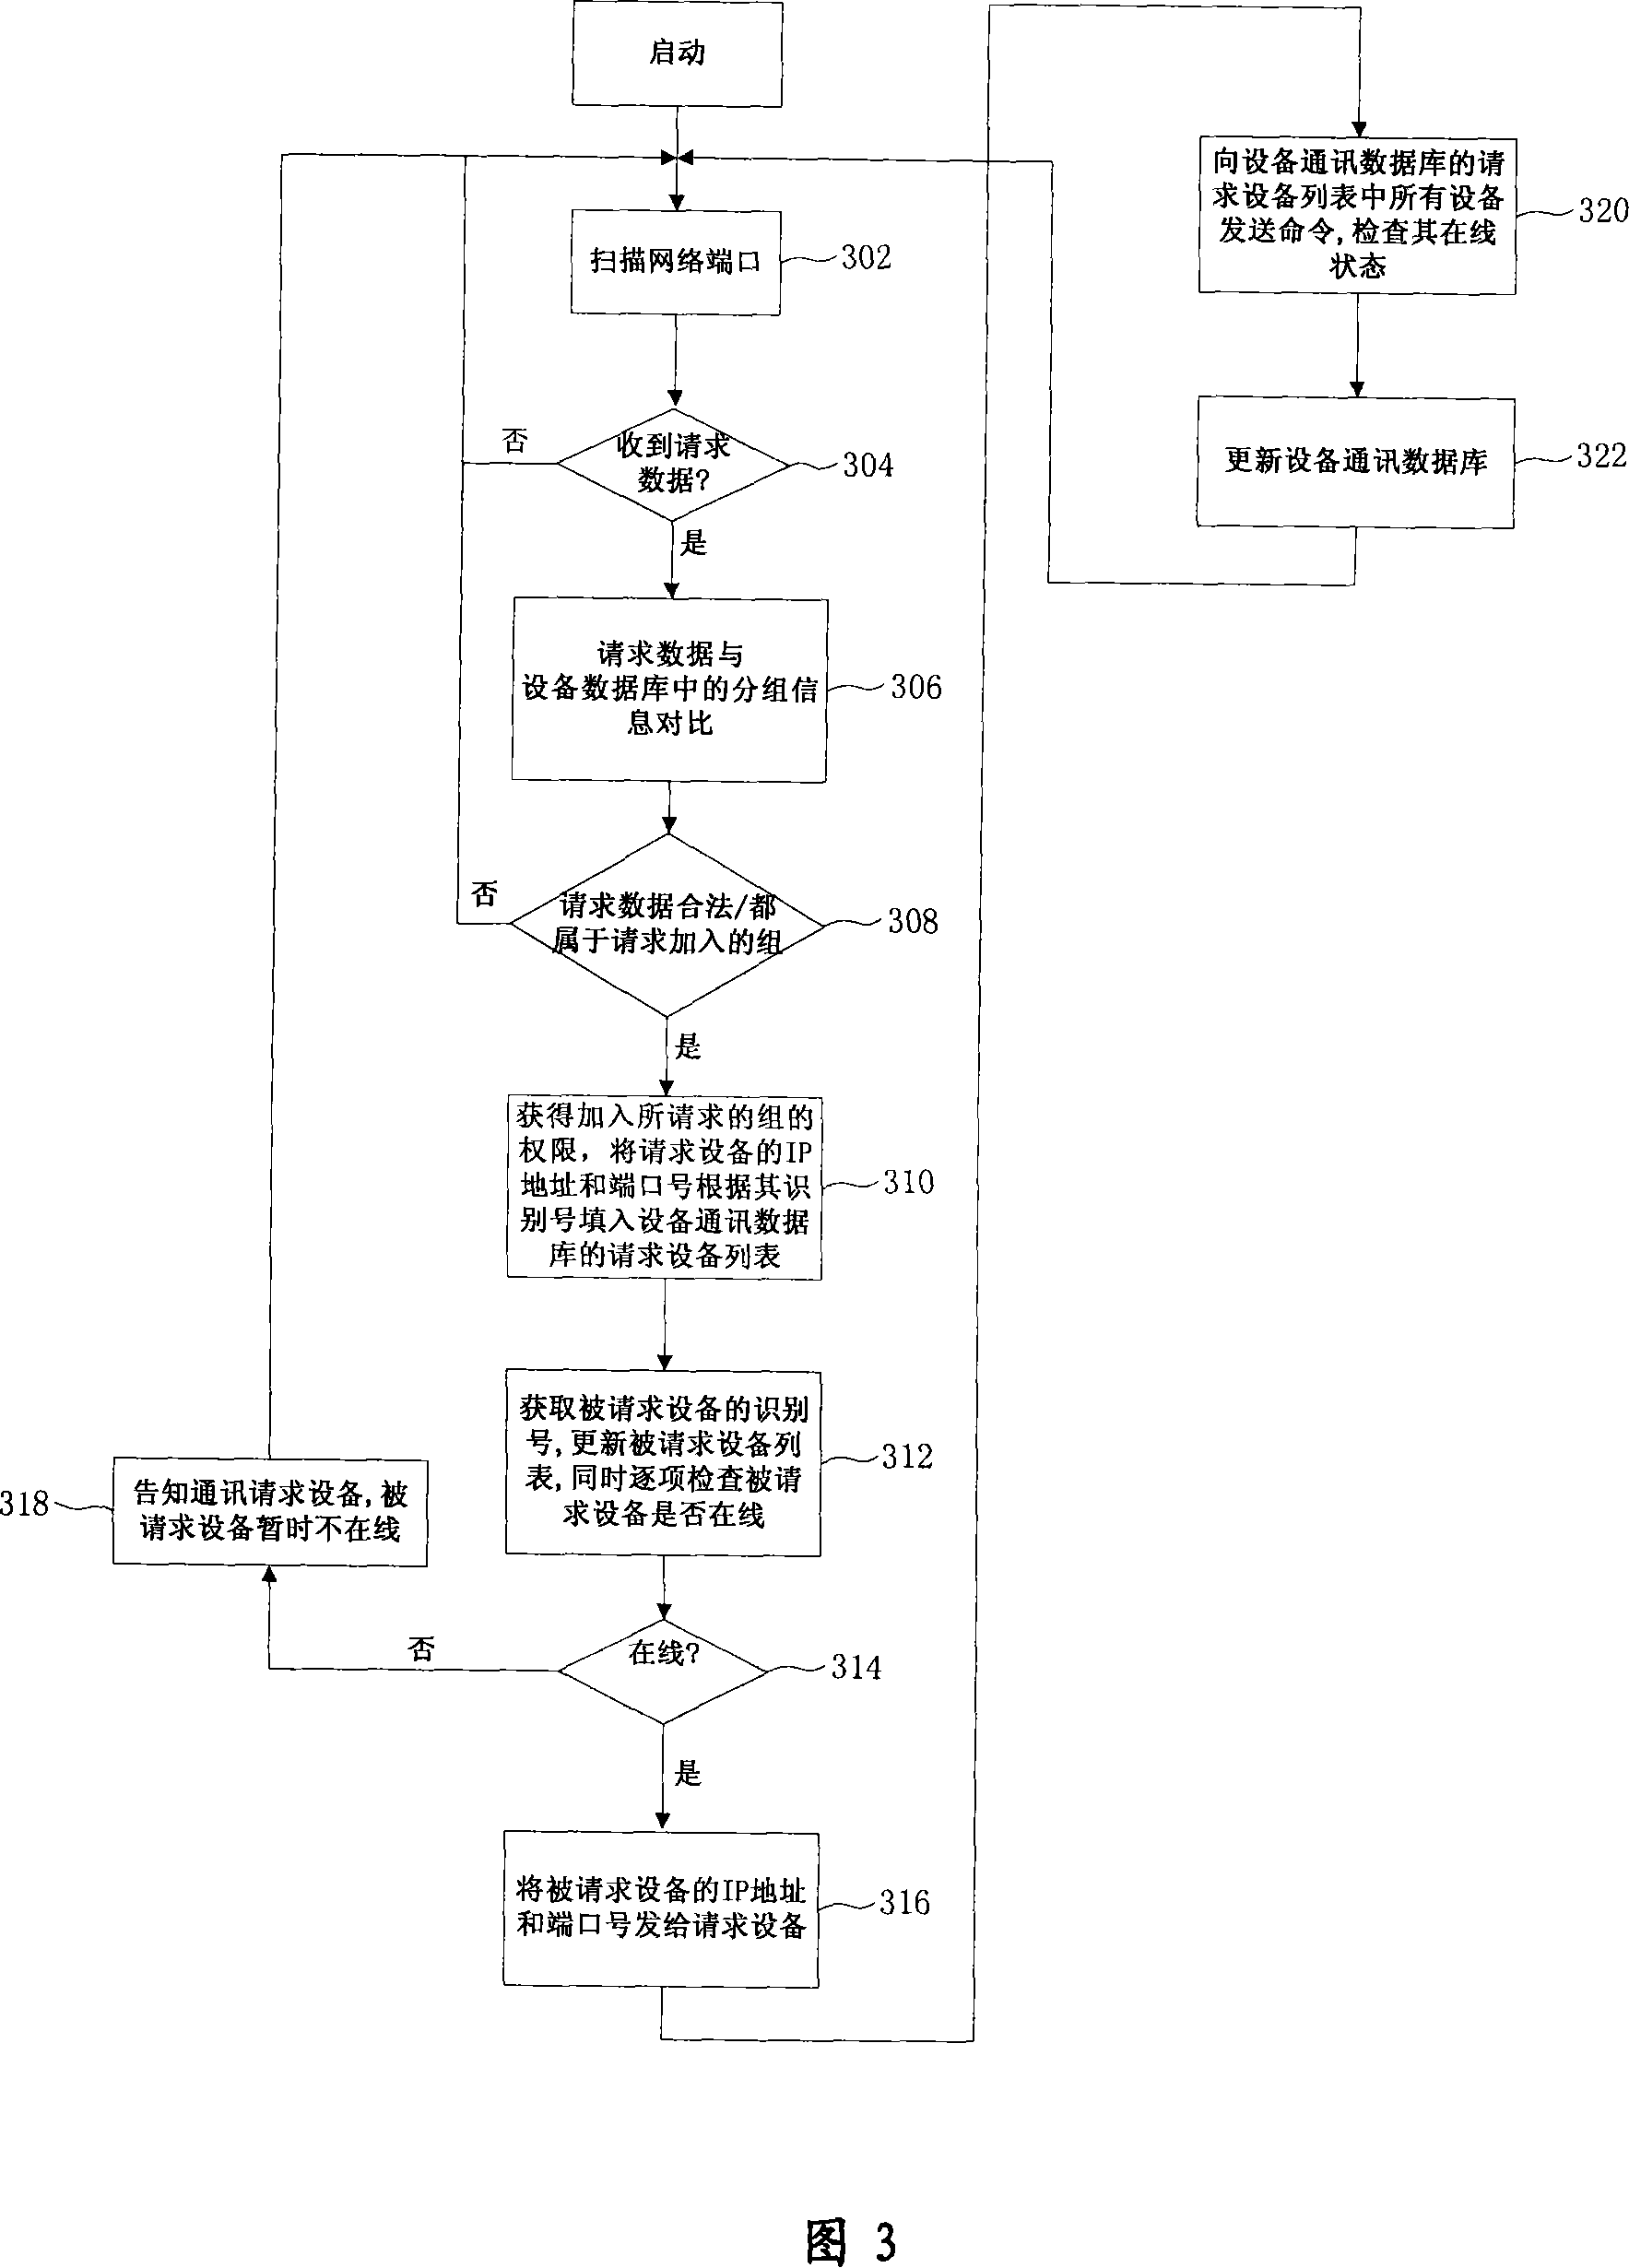 Communication method and system between embedded type equipments